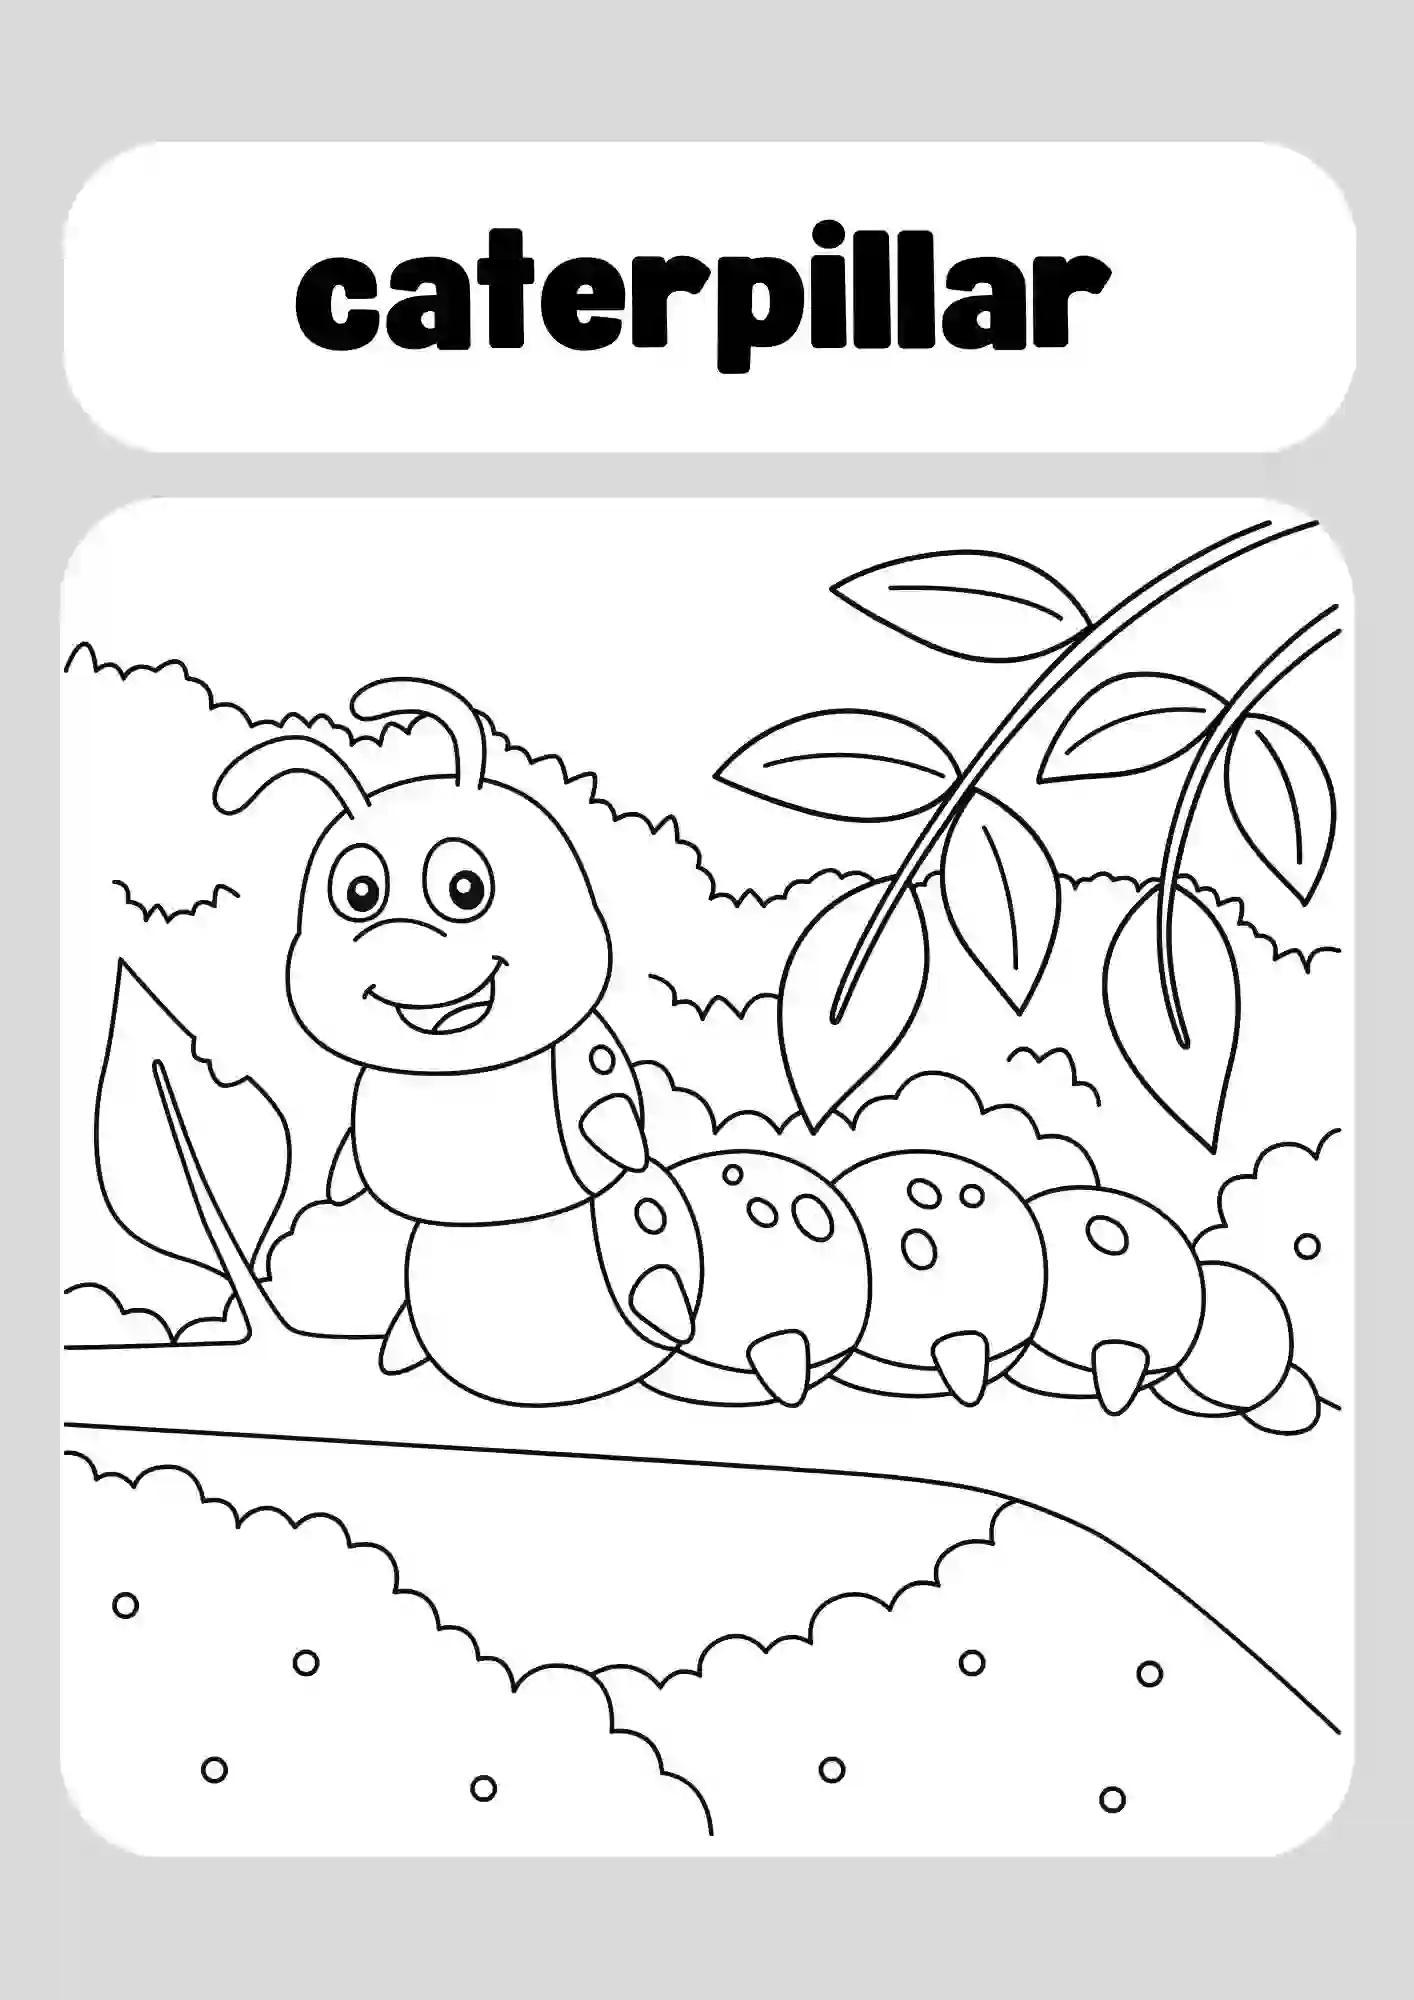 Insects Coloring Worksheets for Kindergarten (caterpillar)